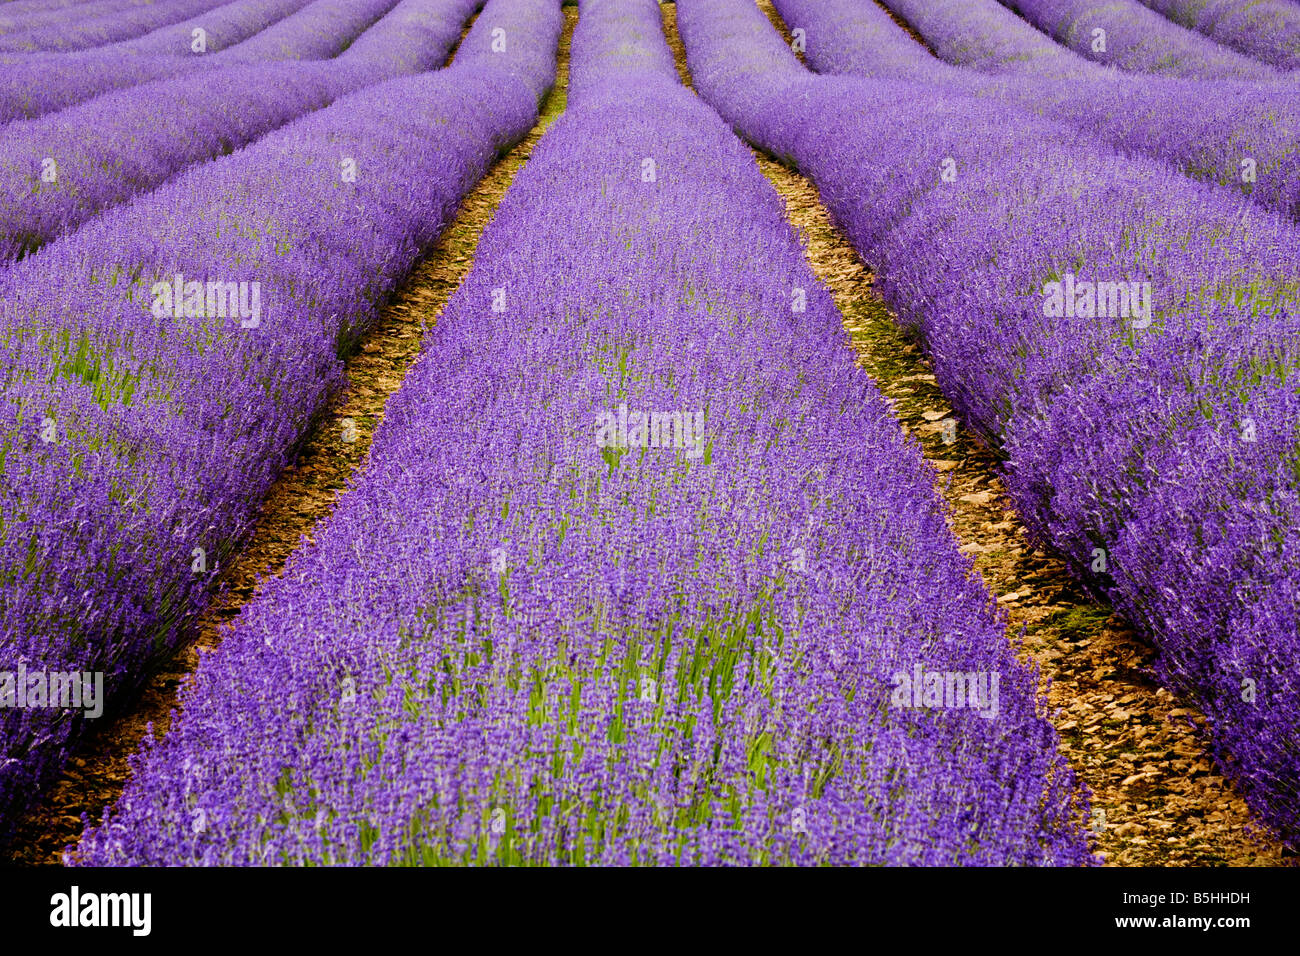 Rows of Lavender in a Field Stock Photo